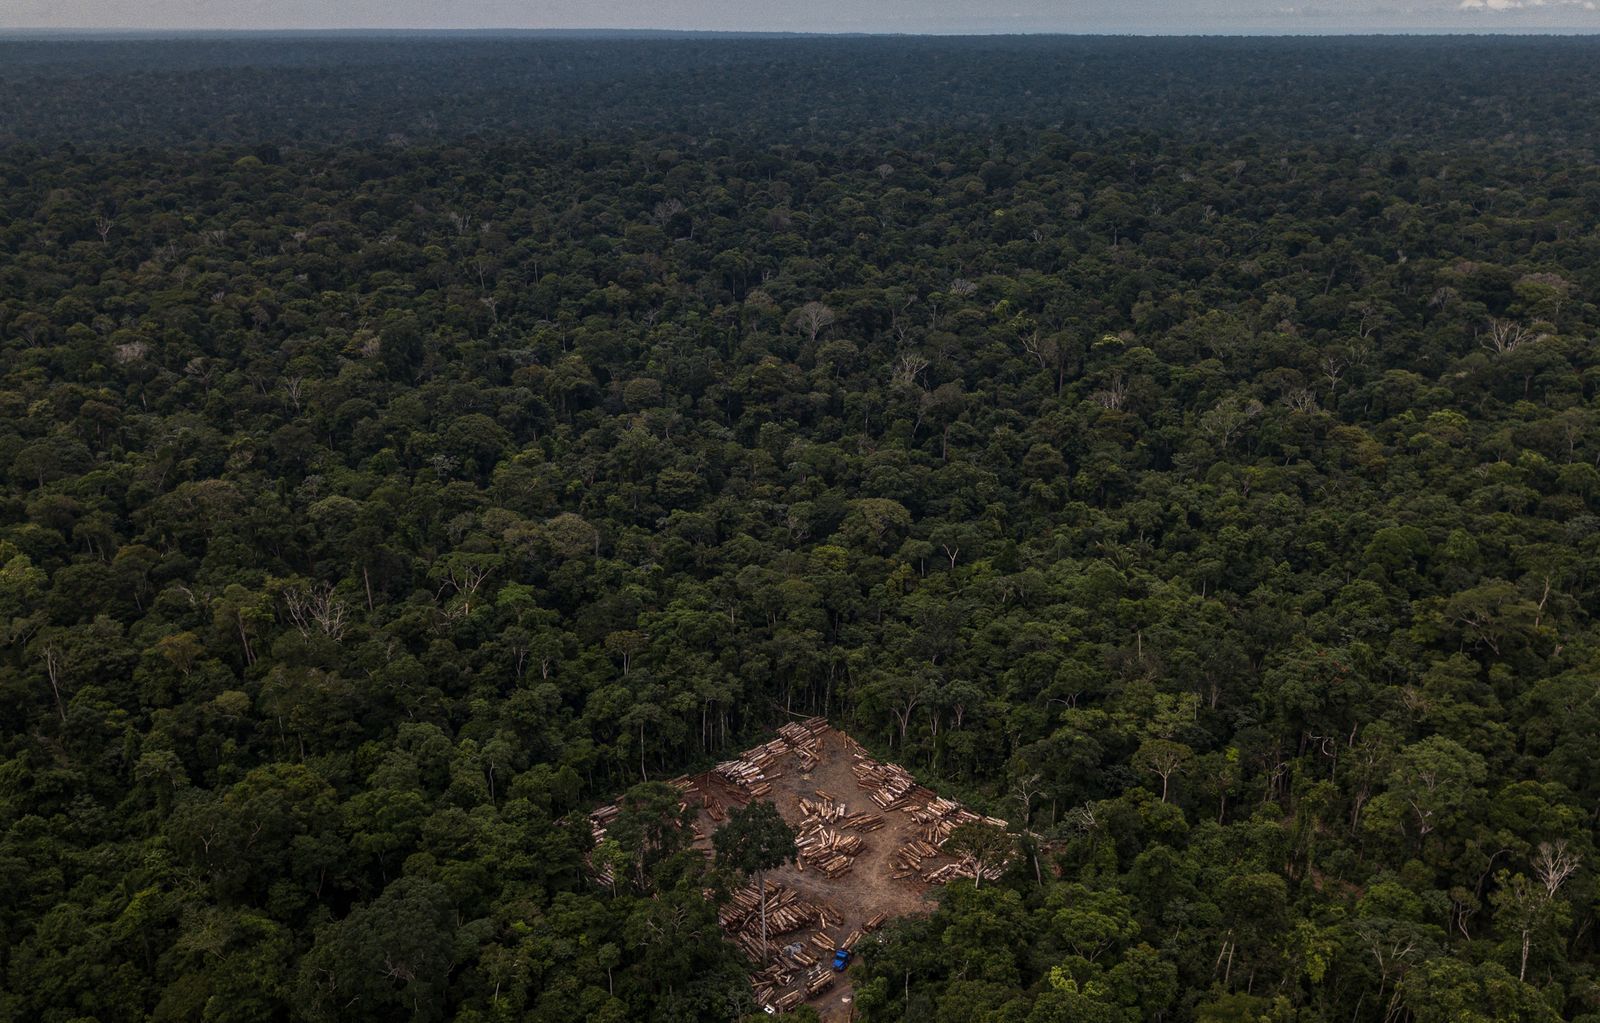 A clearing in the lower Tapajós, in Pará, serves to store wood seized by agents from Ibama. This year, 54% of hot spots in the Amazon were recorded in deforested areas, according to NASA data. Image by Flavio Forner. Brazil, 2020.